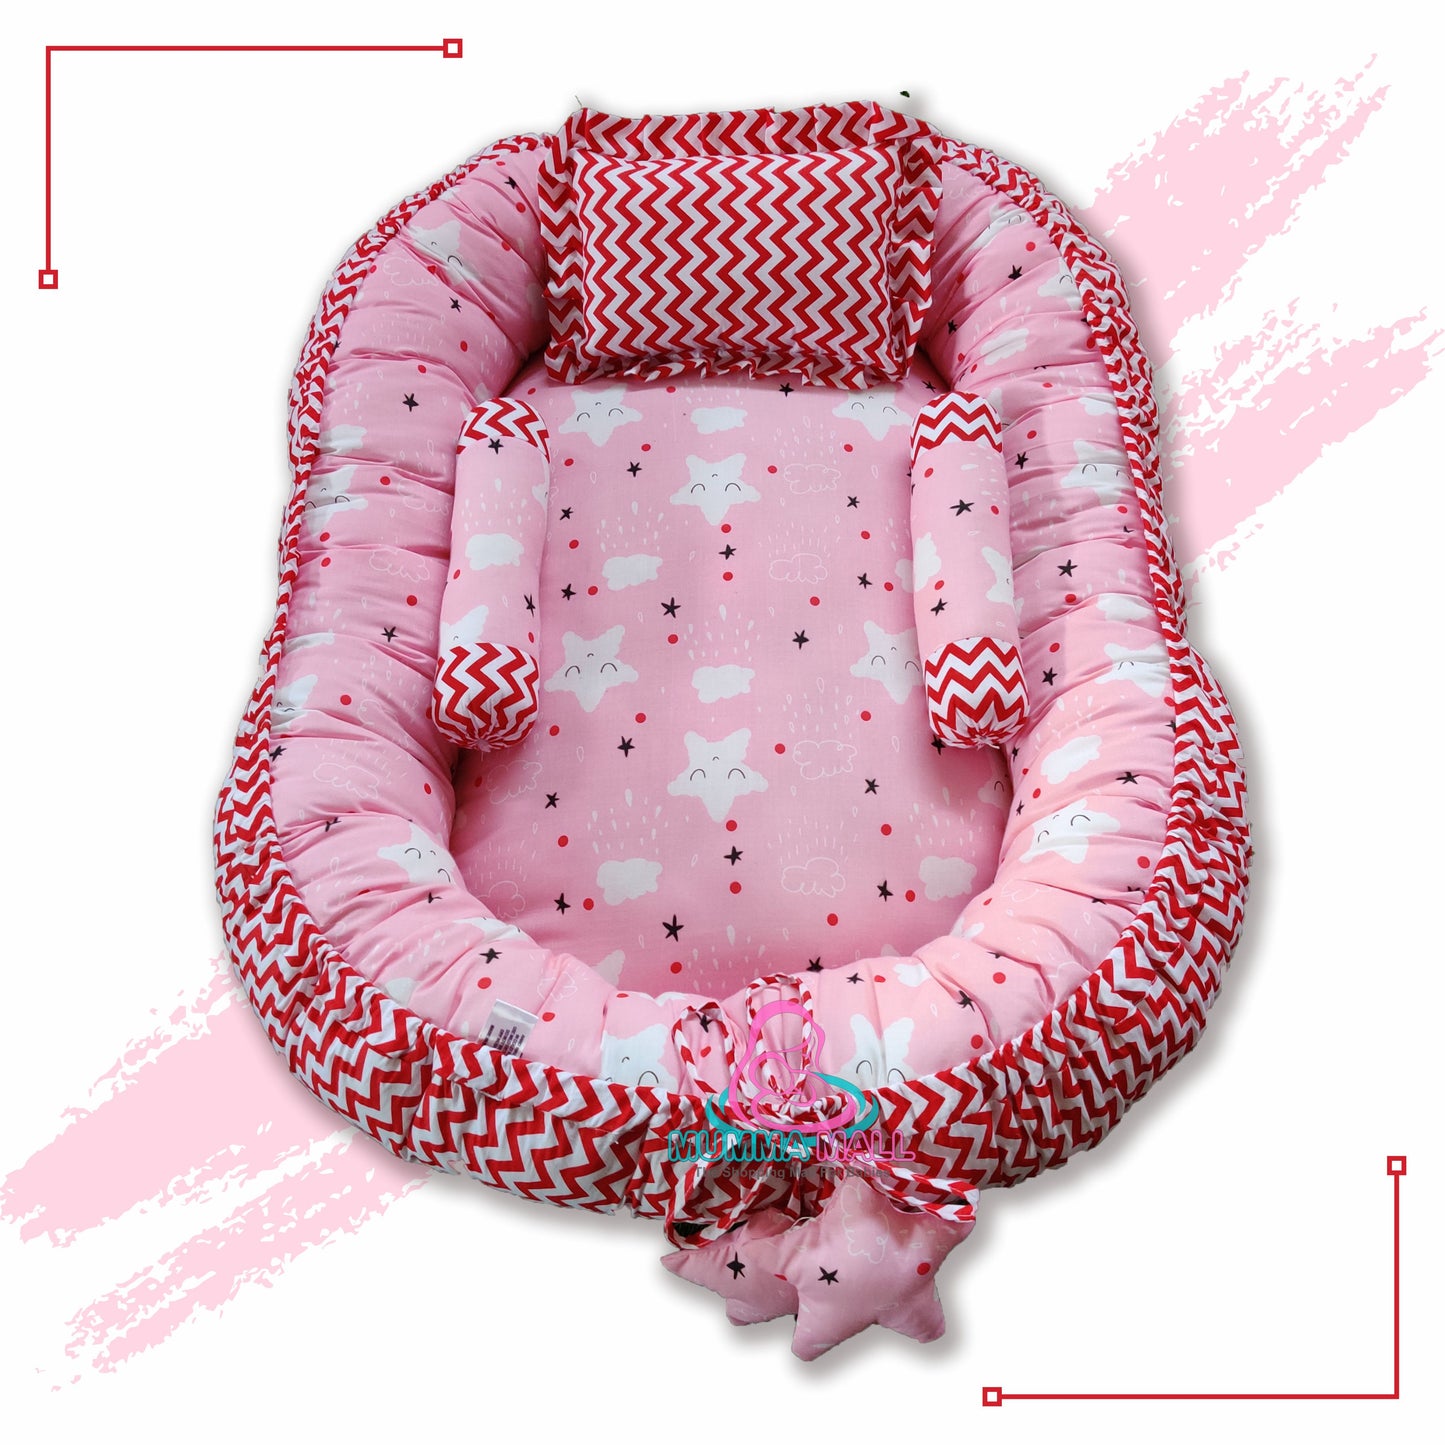 Baby nest bedding set with set of 3 pillows as neck support, side support and toy (Pink and Red)